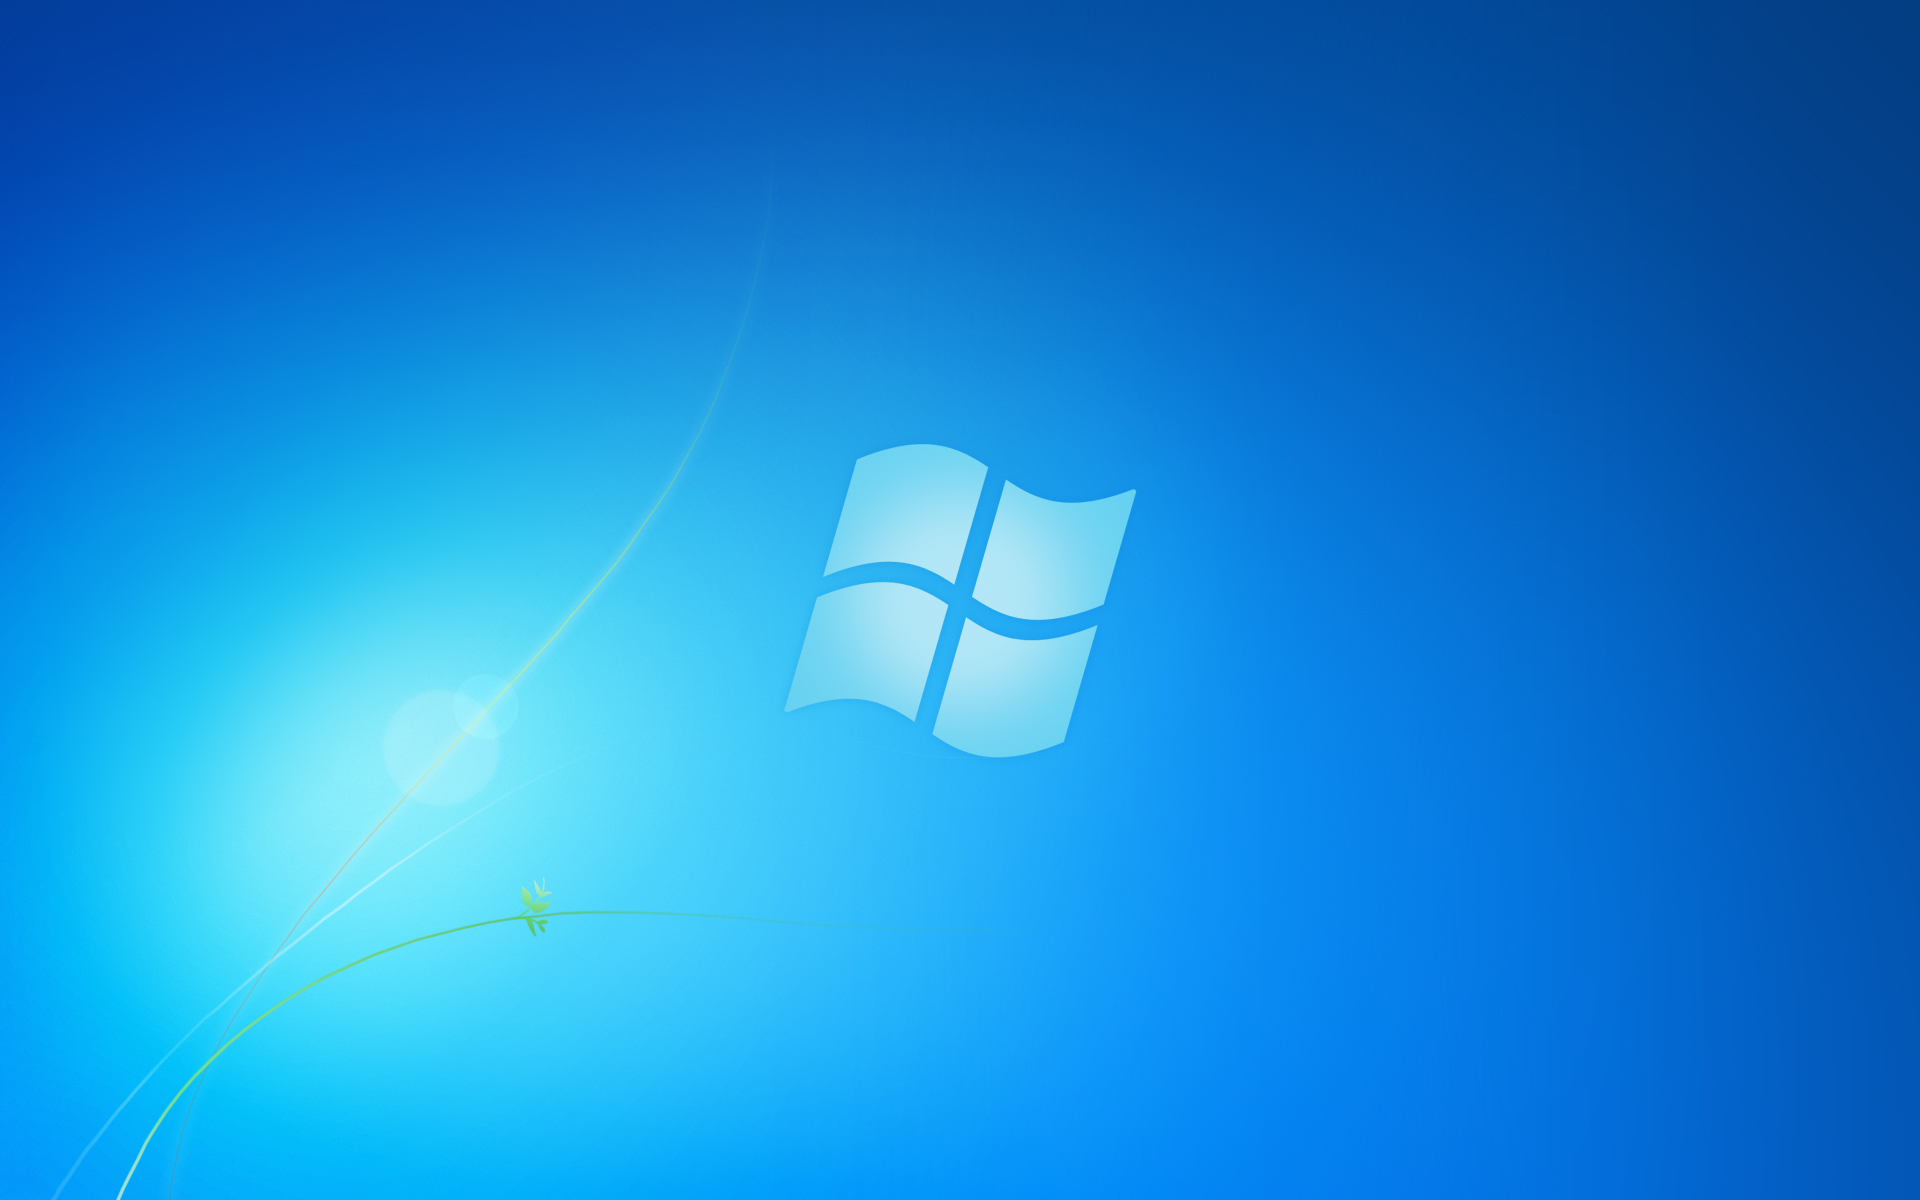 Change Windows 7 Starter Edition Wallpaper Easily With 1920x1200